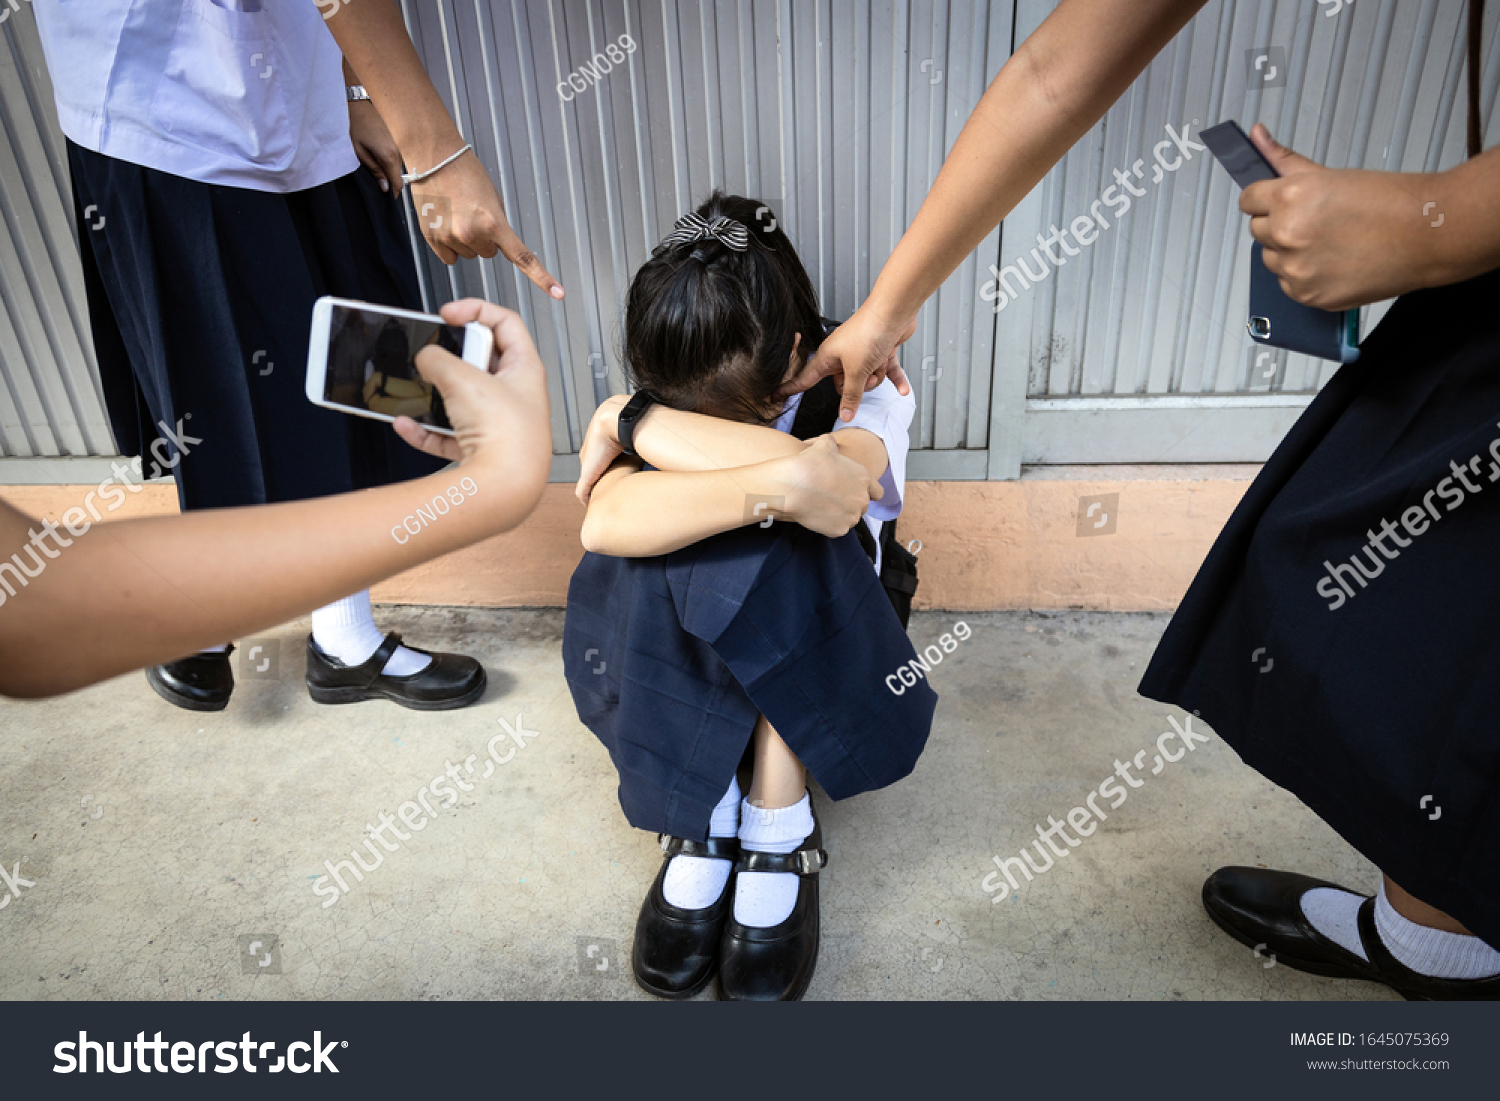 Problems of bullying at school,sad stressed asian girl student crying sitting on the floor,group of hands pointing finger to scared schoolgirl, bullying victim being video recorded on a mobile phone #1645075369